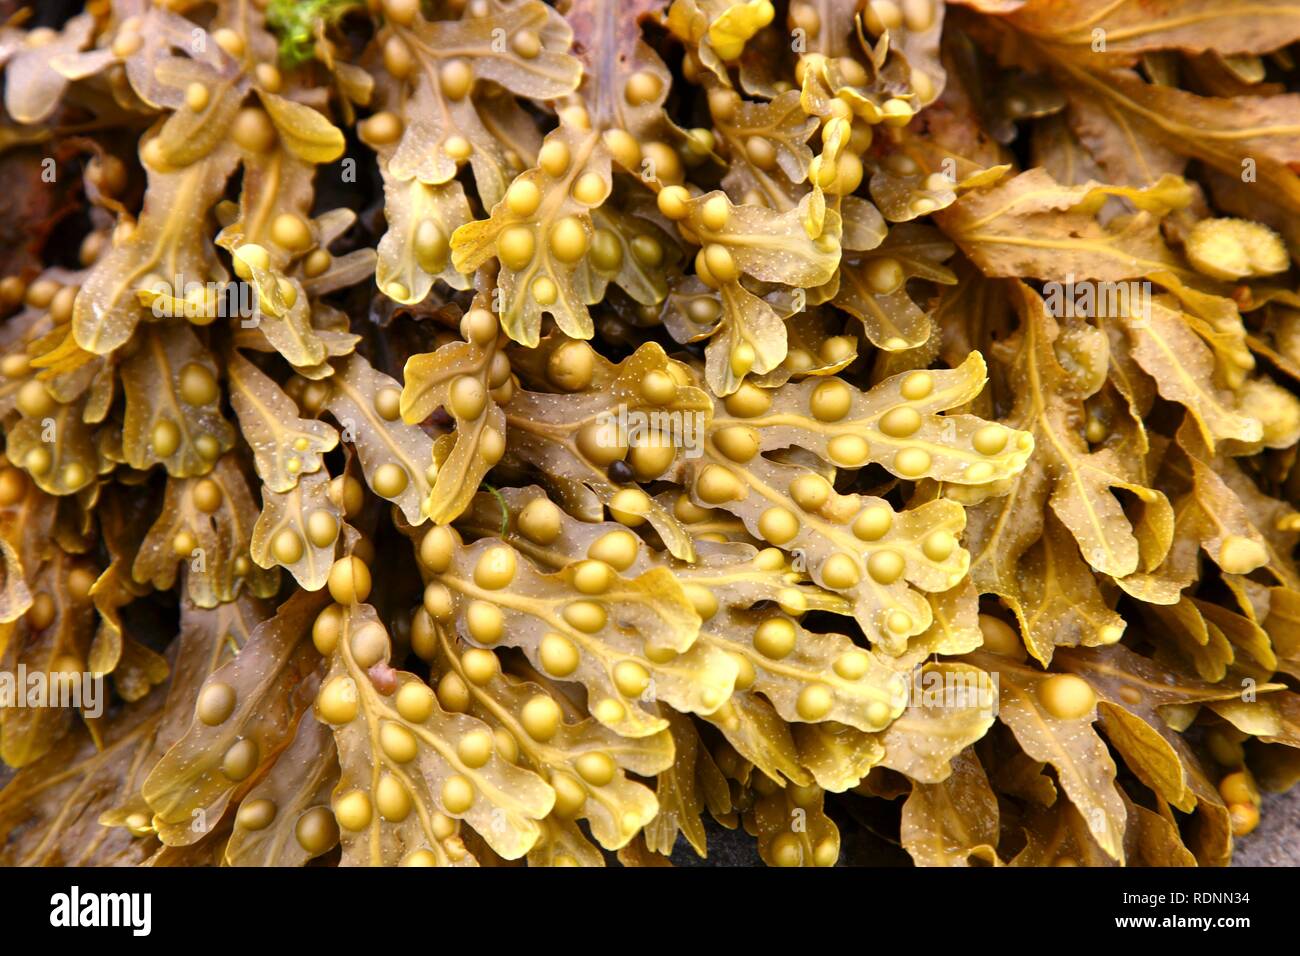 Seaweed, water plant, at low tide Stock Photo